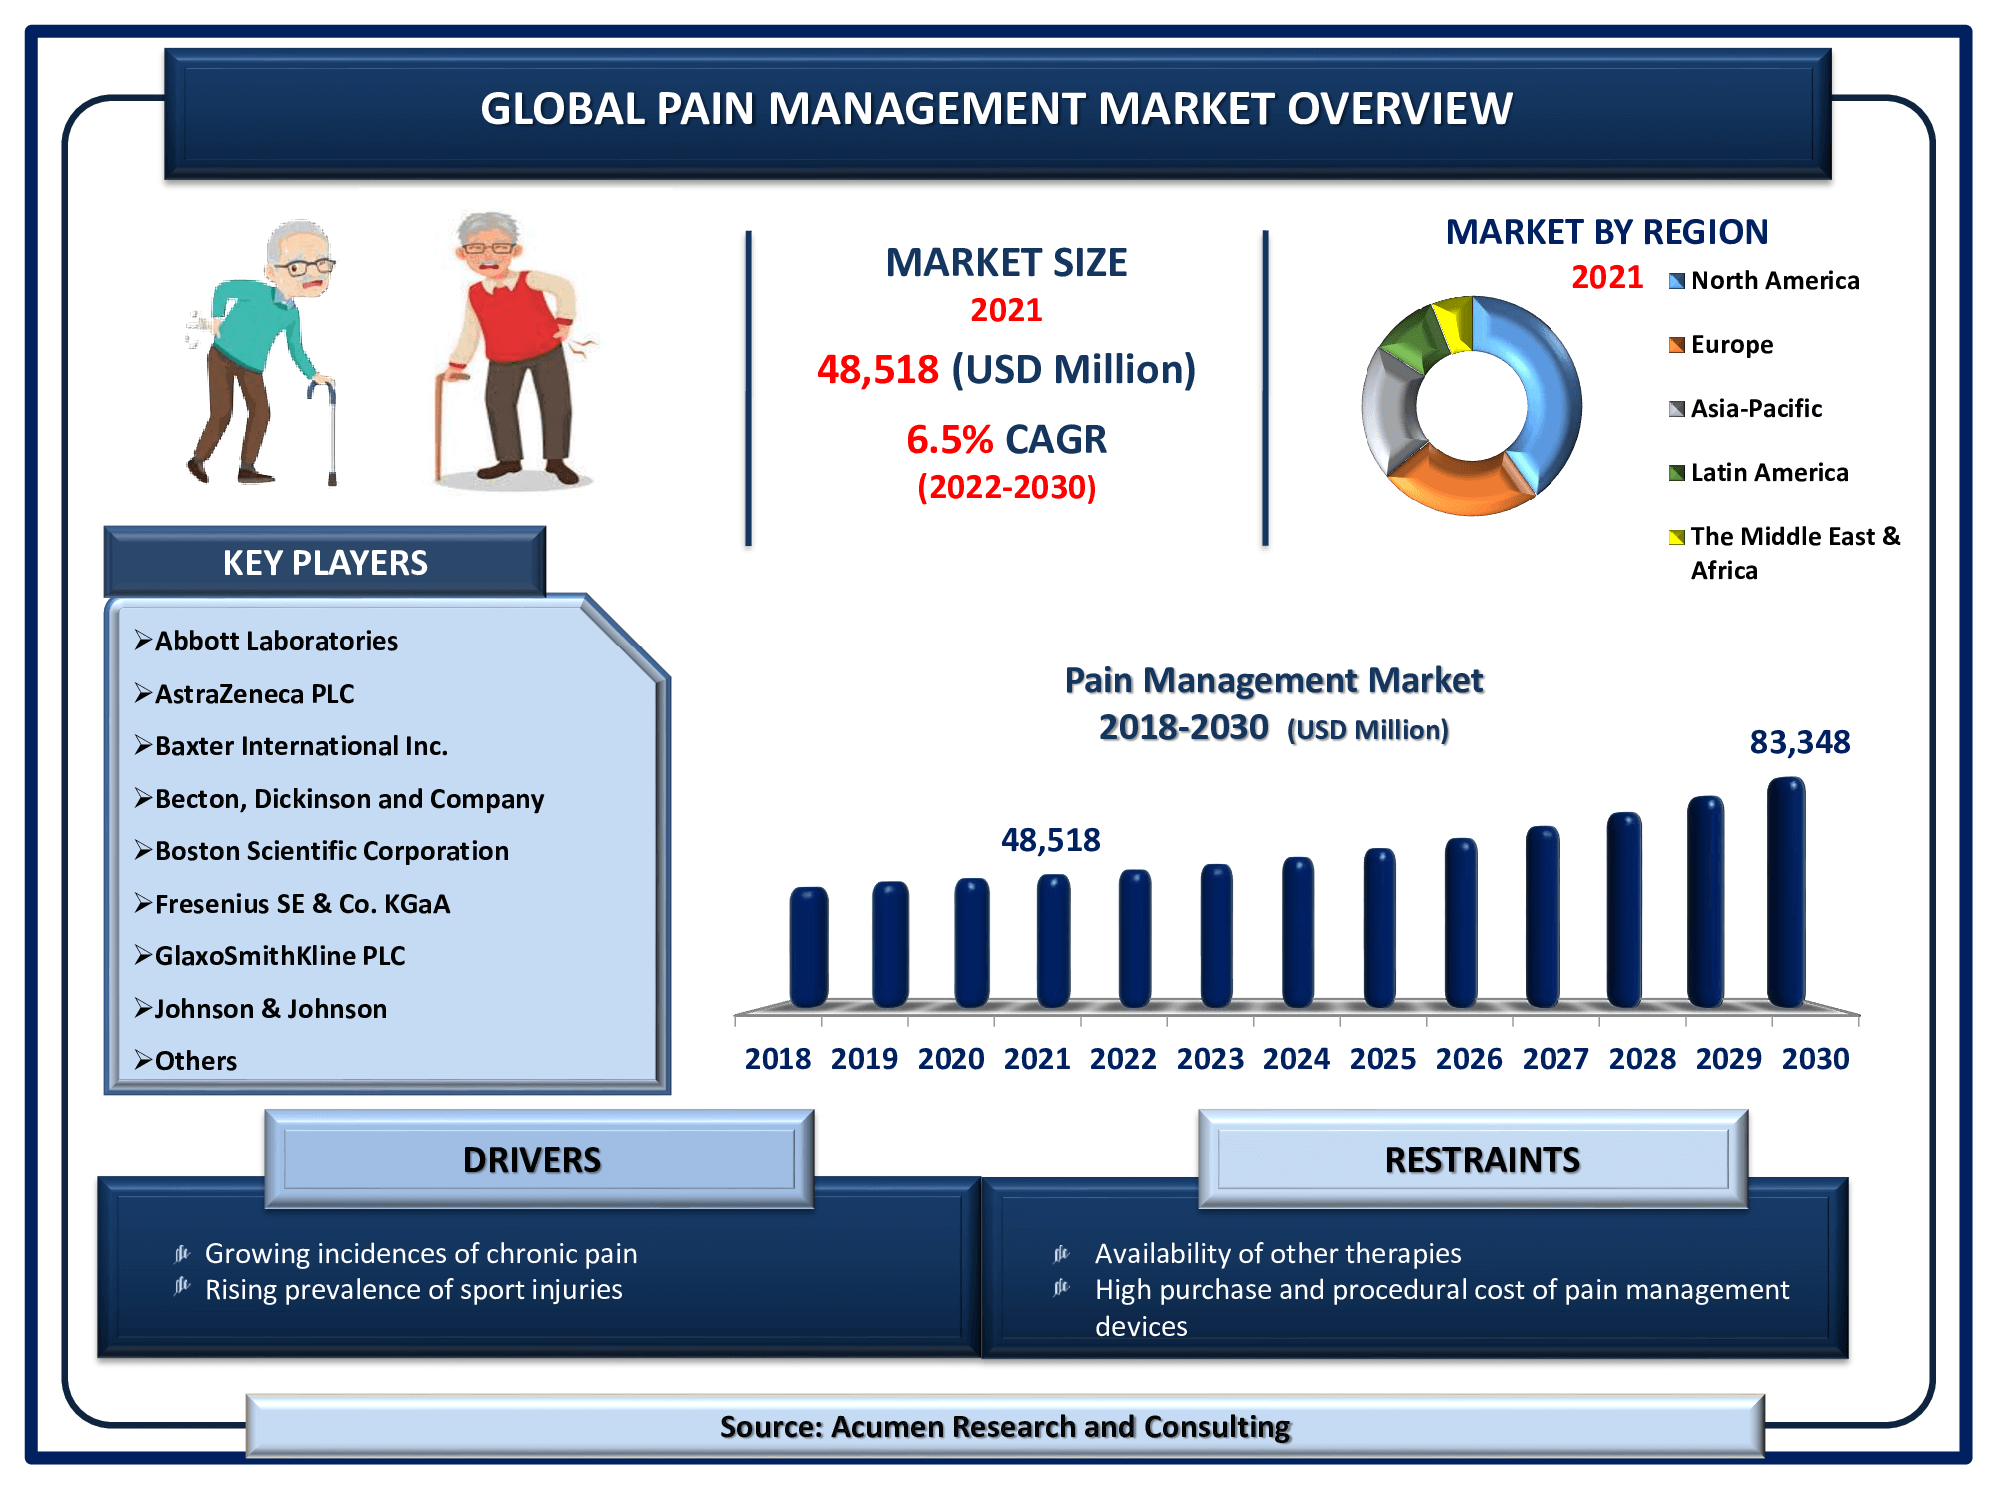 The Global Pain Management Market Size accounted for USD 48,518 Million in 2021 and is estimated to garner a market size of USD 83,348 Million by 2030 rising at a CAGR of 6.5% from 2022 to 2030. 